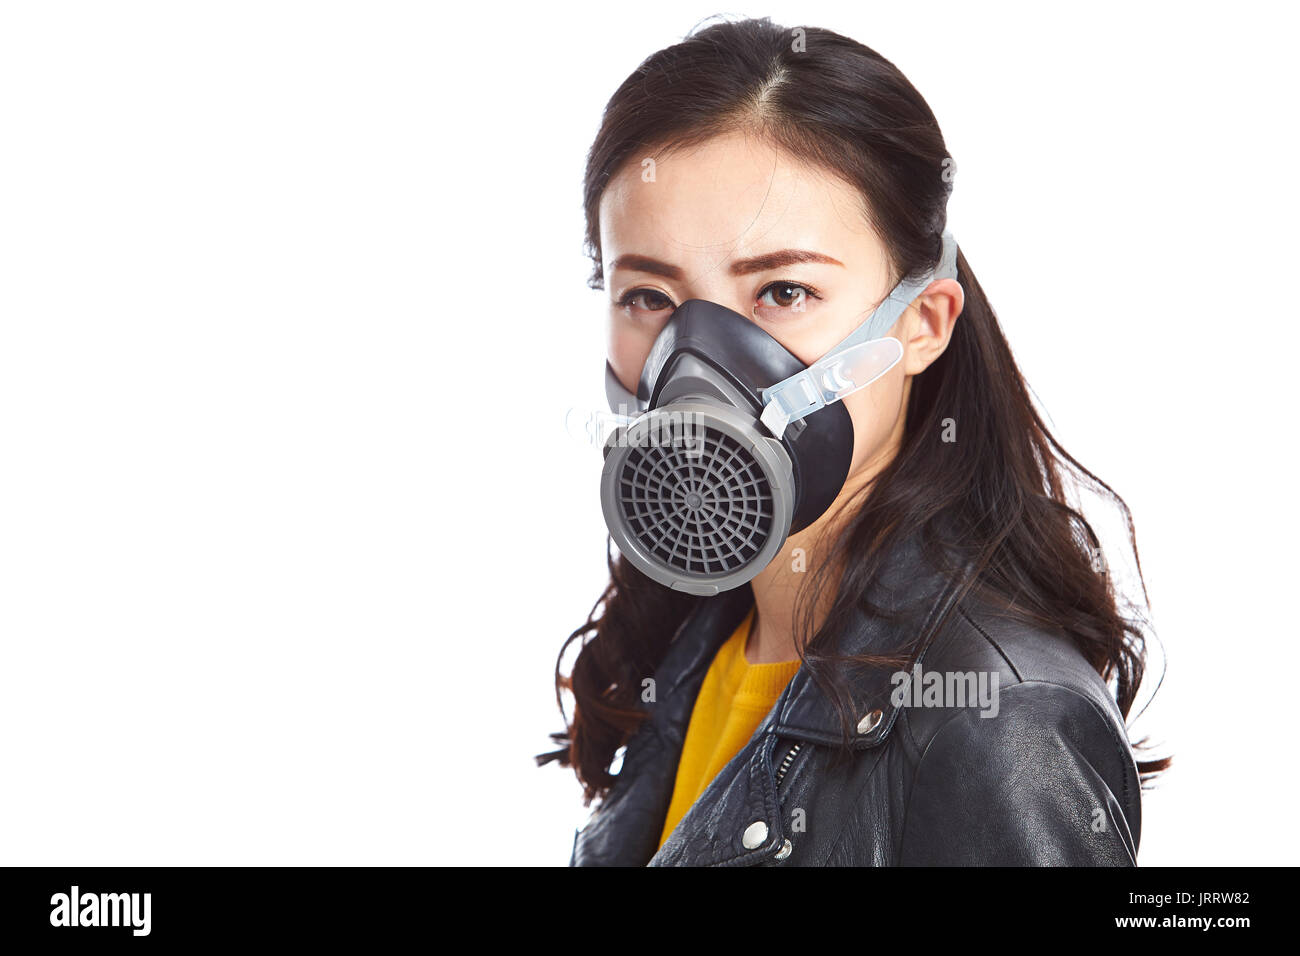 young asian woman in black leather jacket wearing a gas mask looking at camera, isolated on white background. Stock Photo